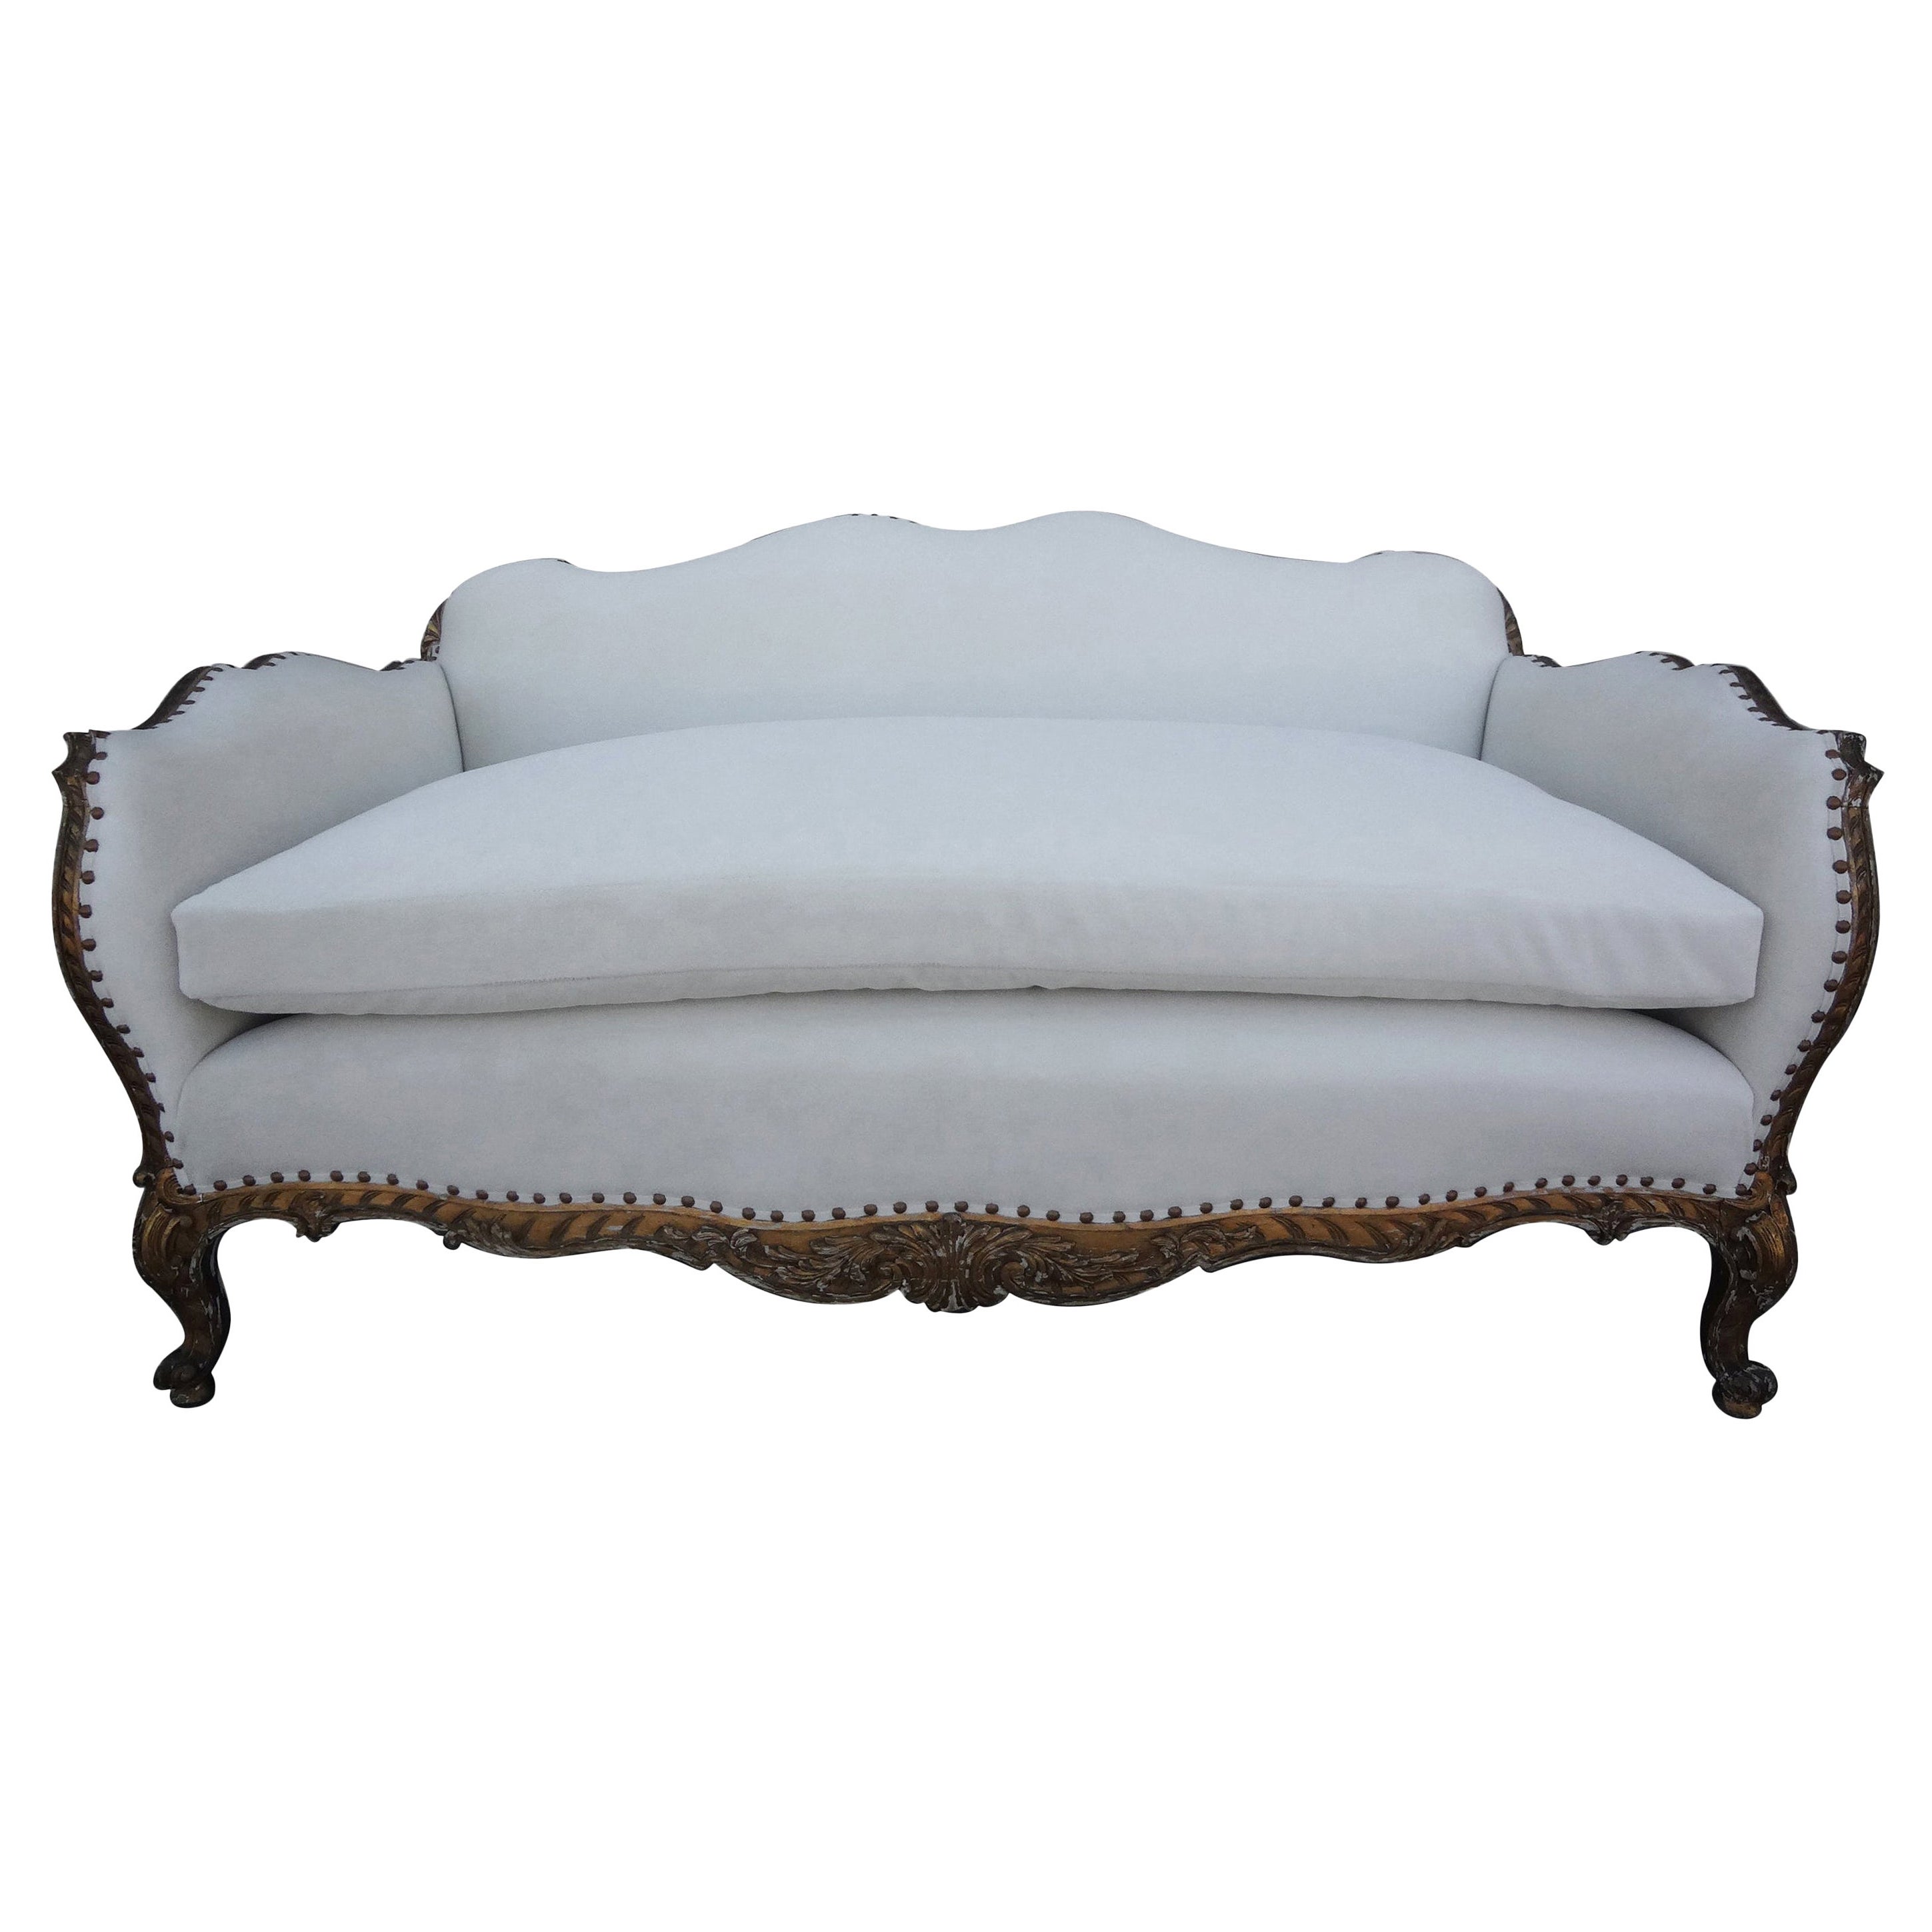 19th Century French Régence Style Giltwood Loveseat or Sofa For Sale